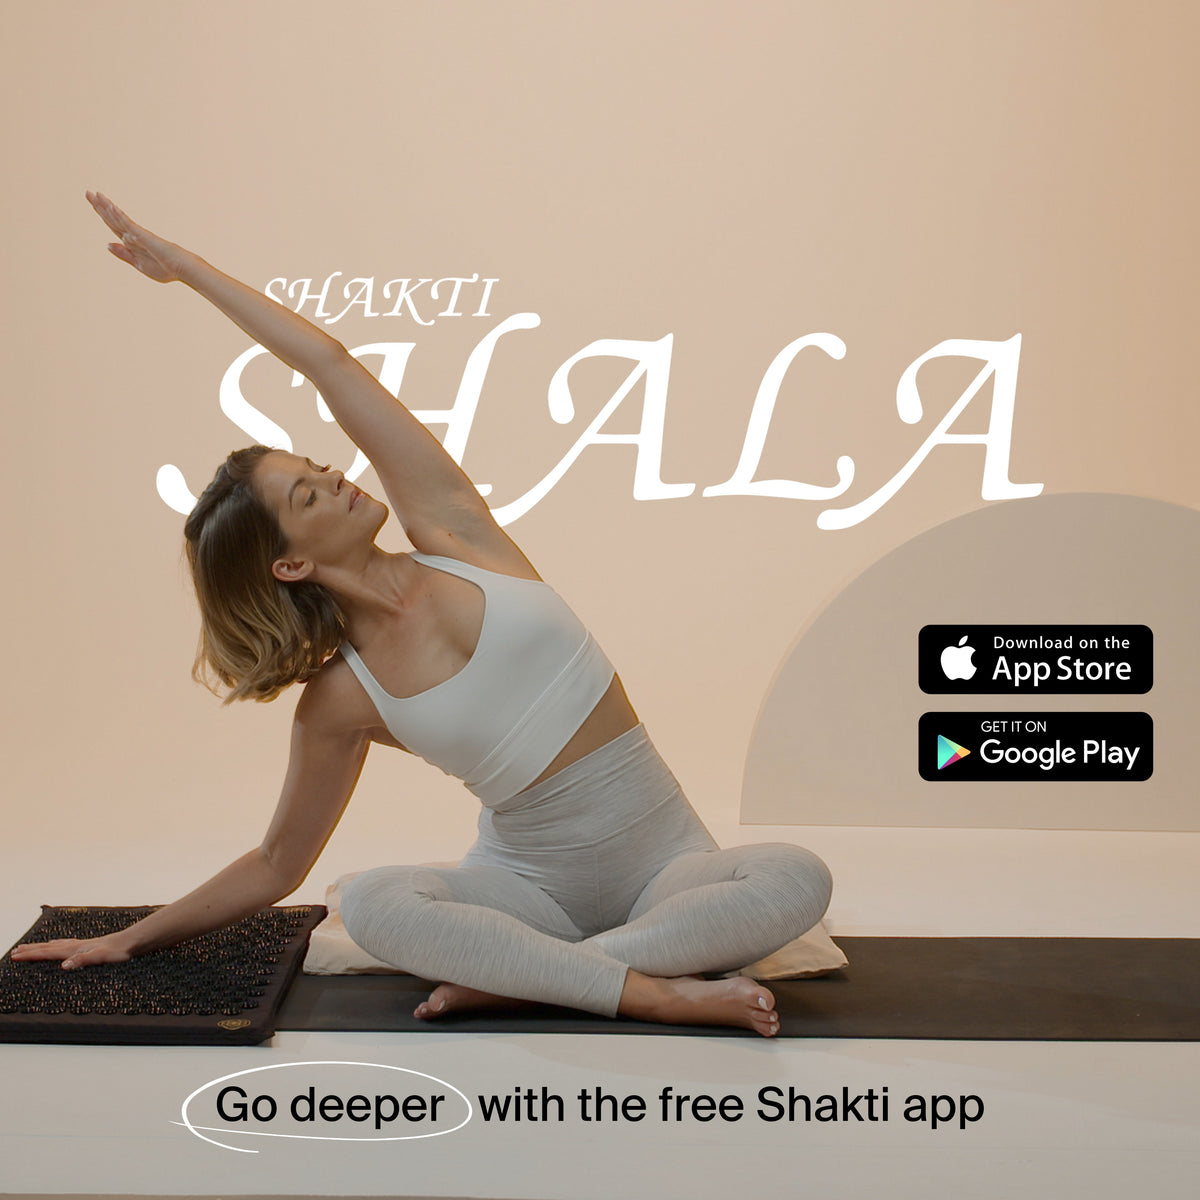 Shakti mat review: How to use and benefits